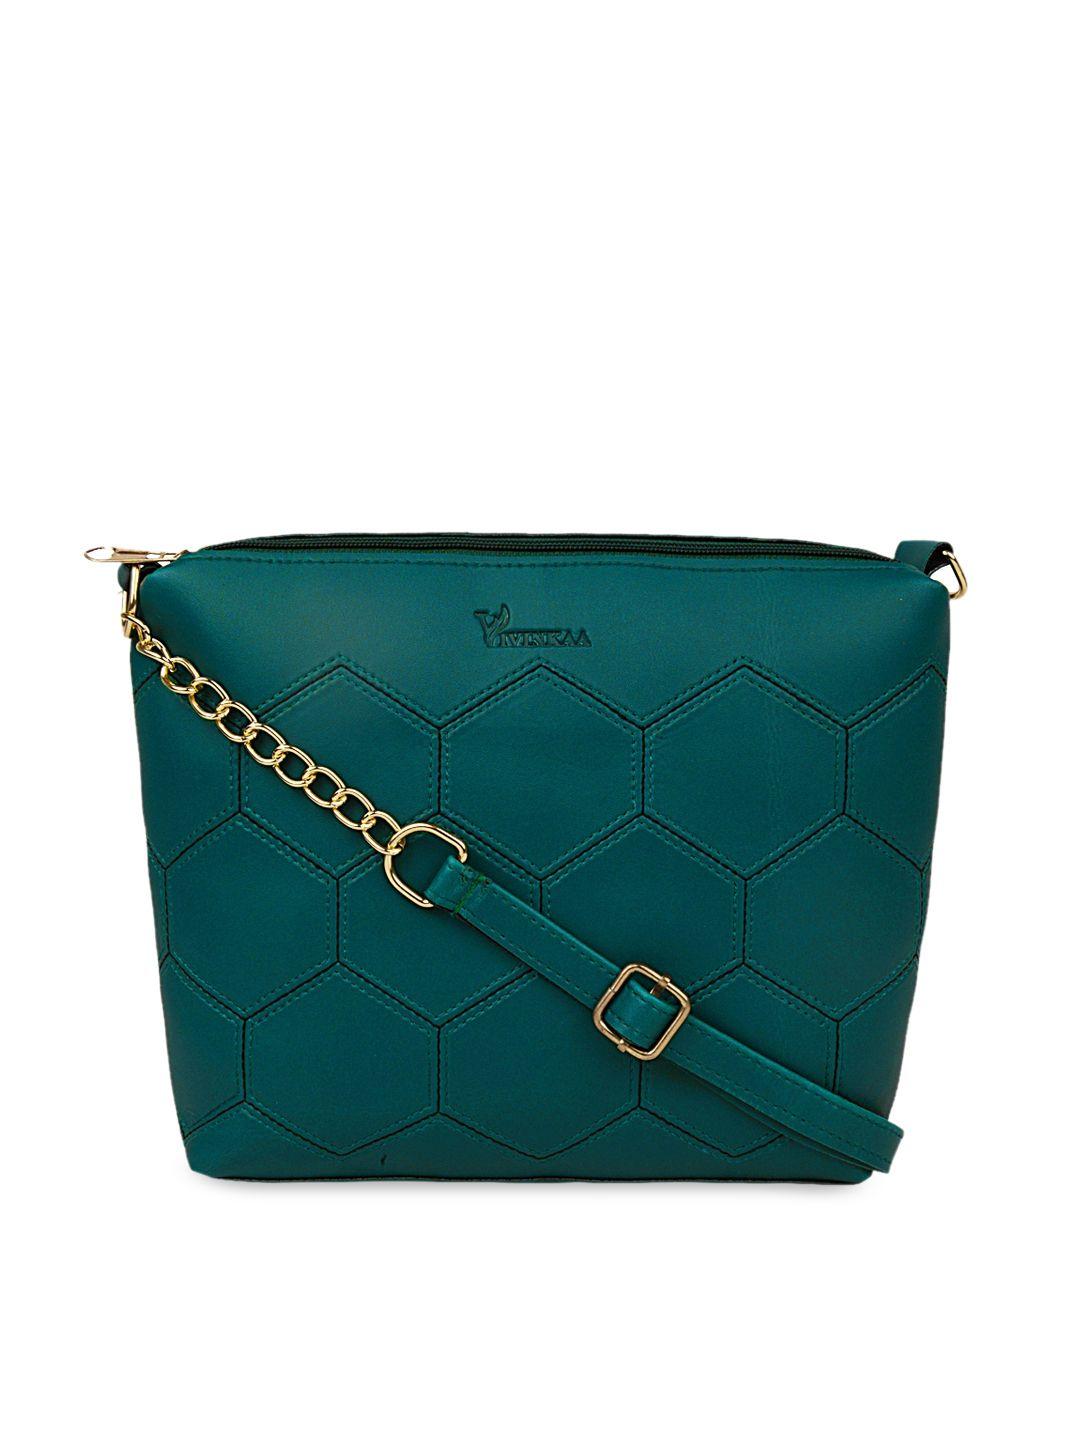 vivinkaa teal blue geometric textured structured sling bag with quilted